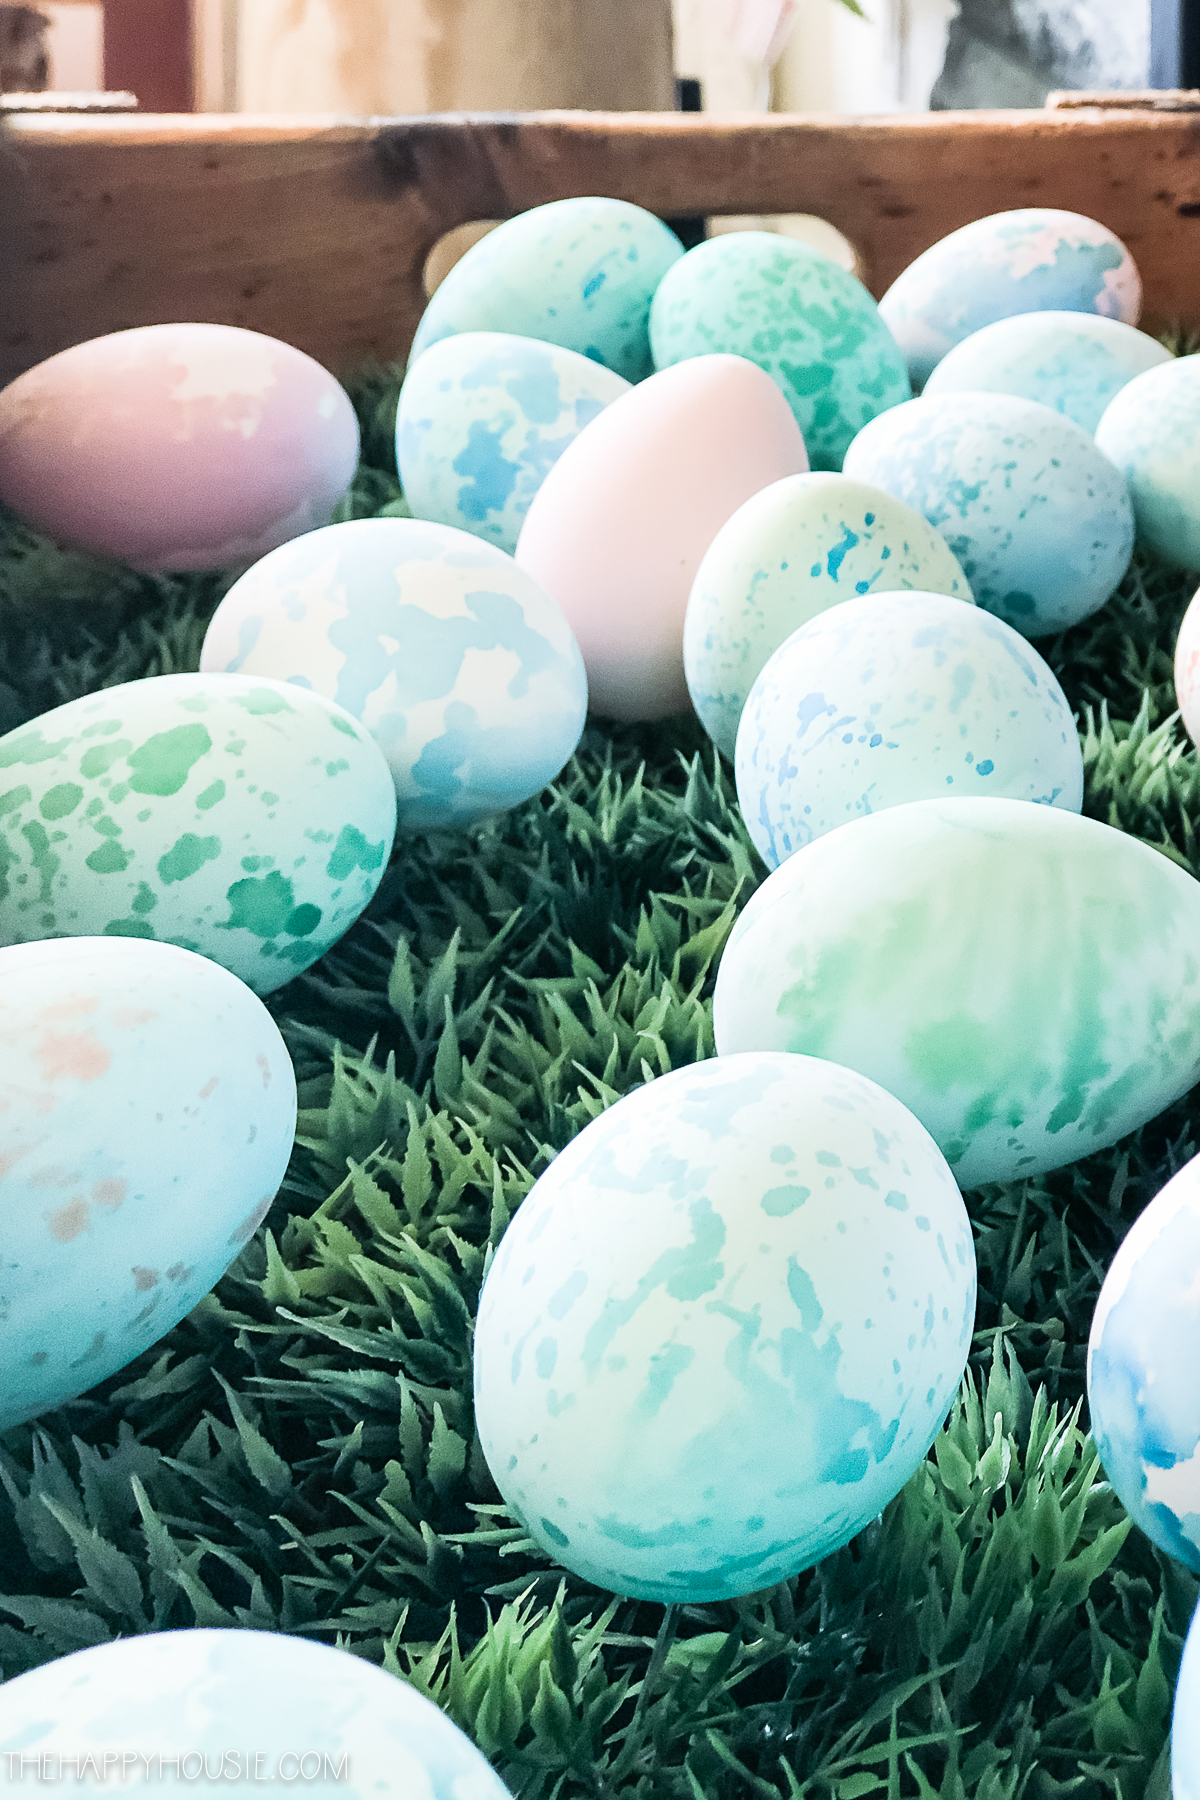 Up close picture of the coloured Easter eggs.